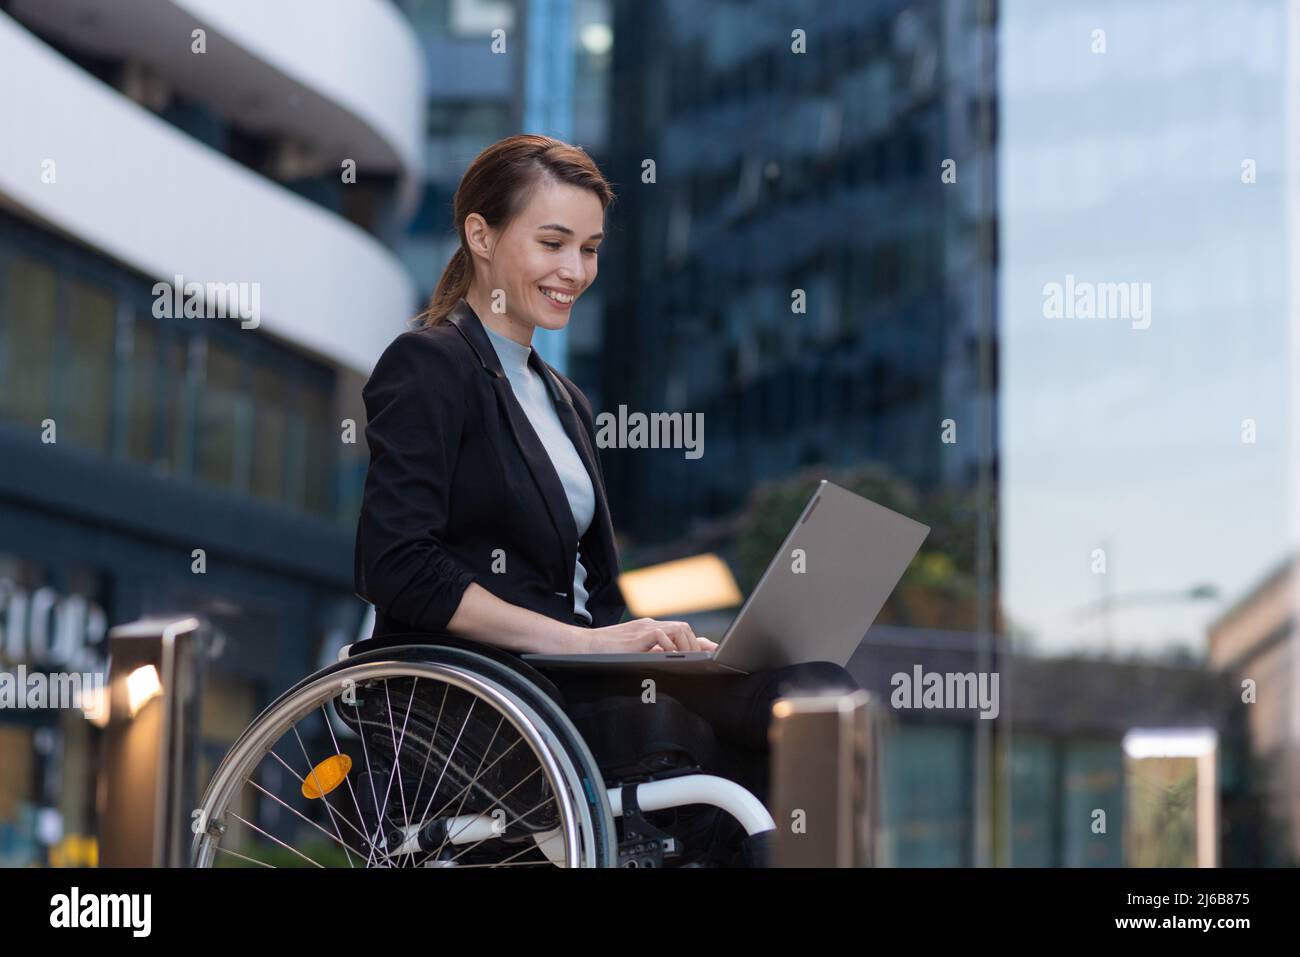 Businesswoman with a disability who uses a wheelchair working outside Stock Photo